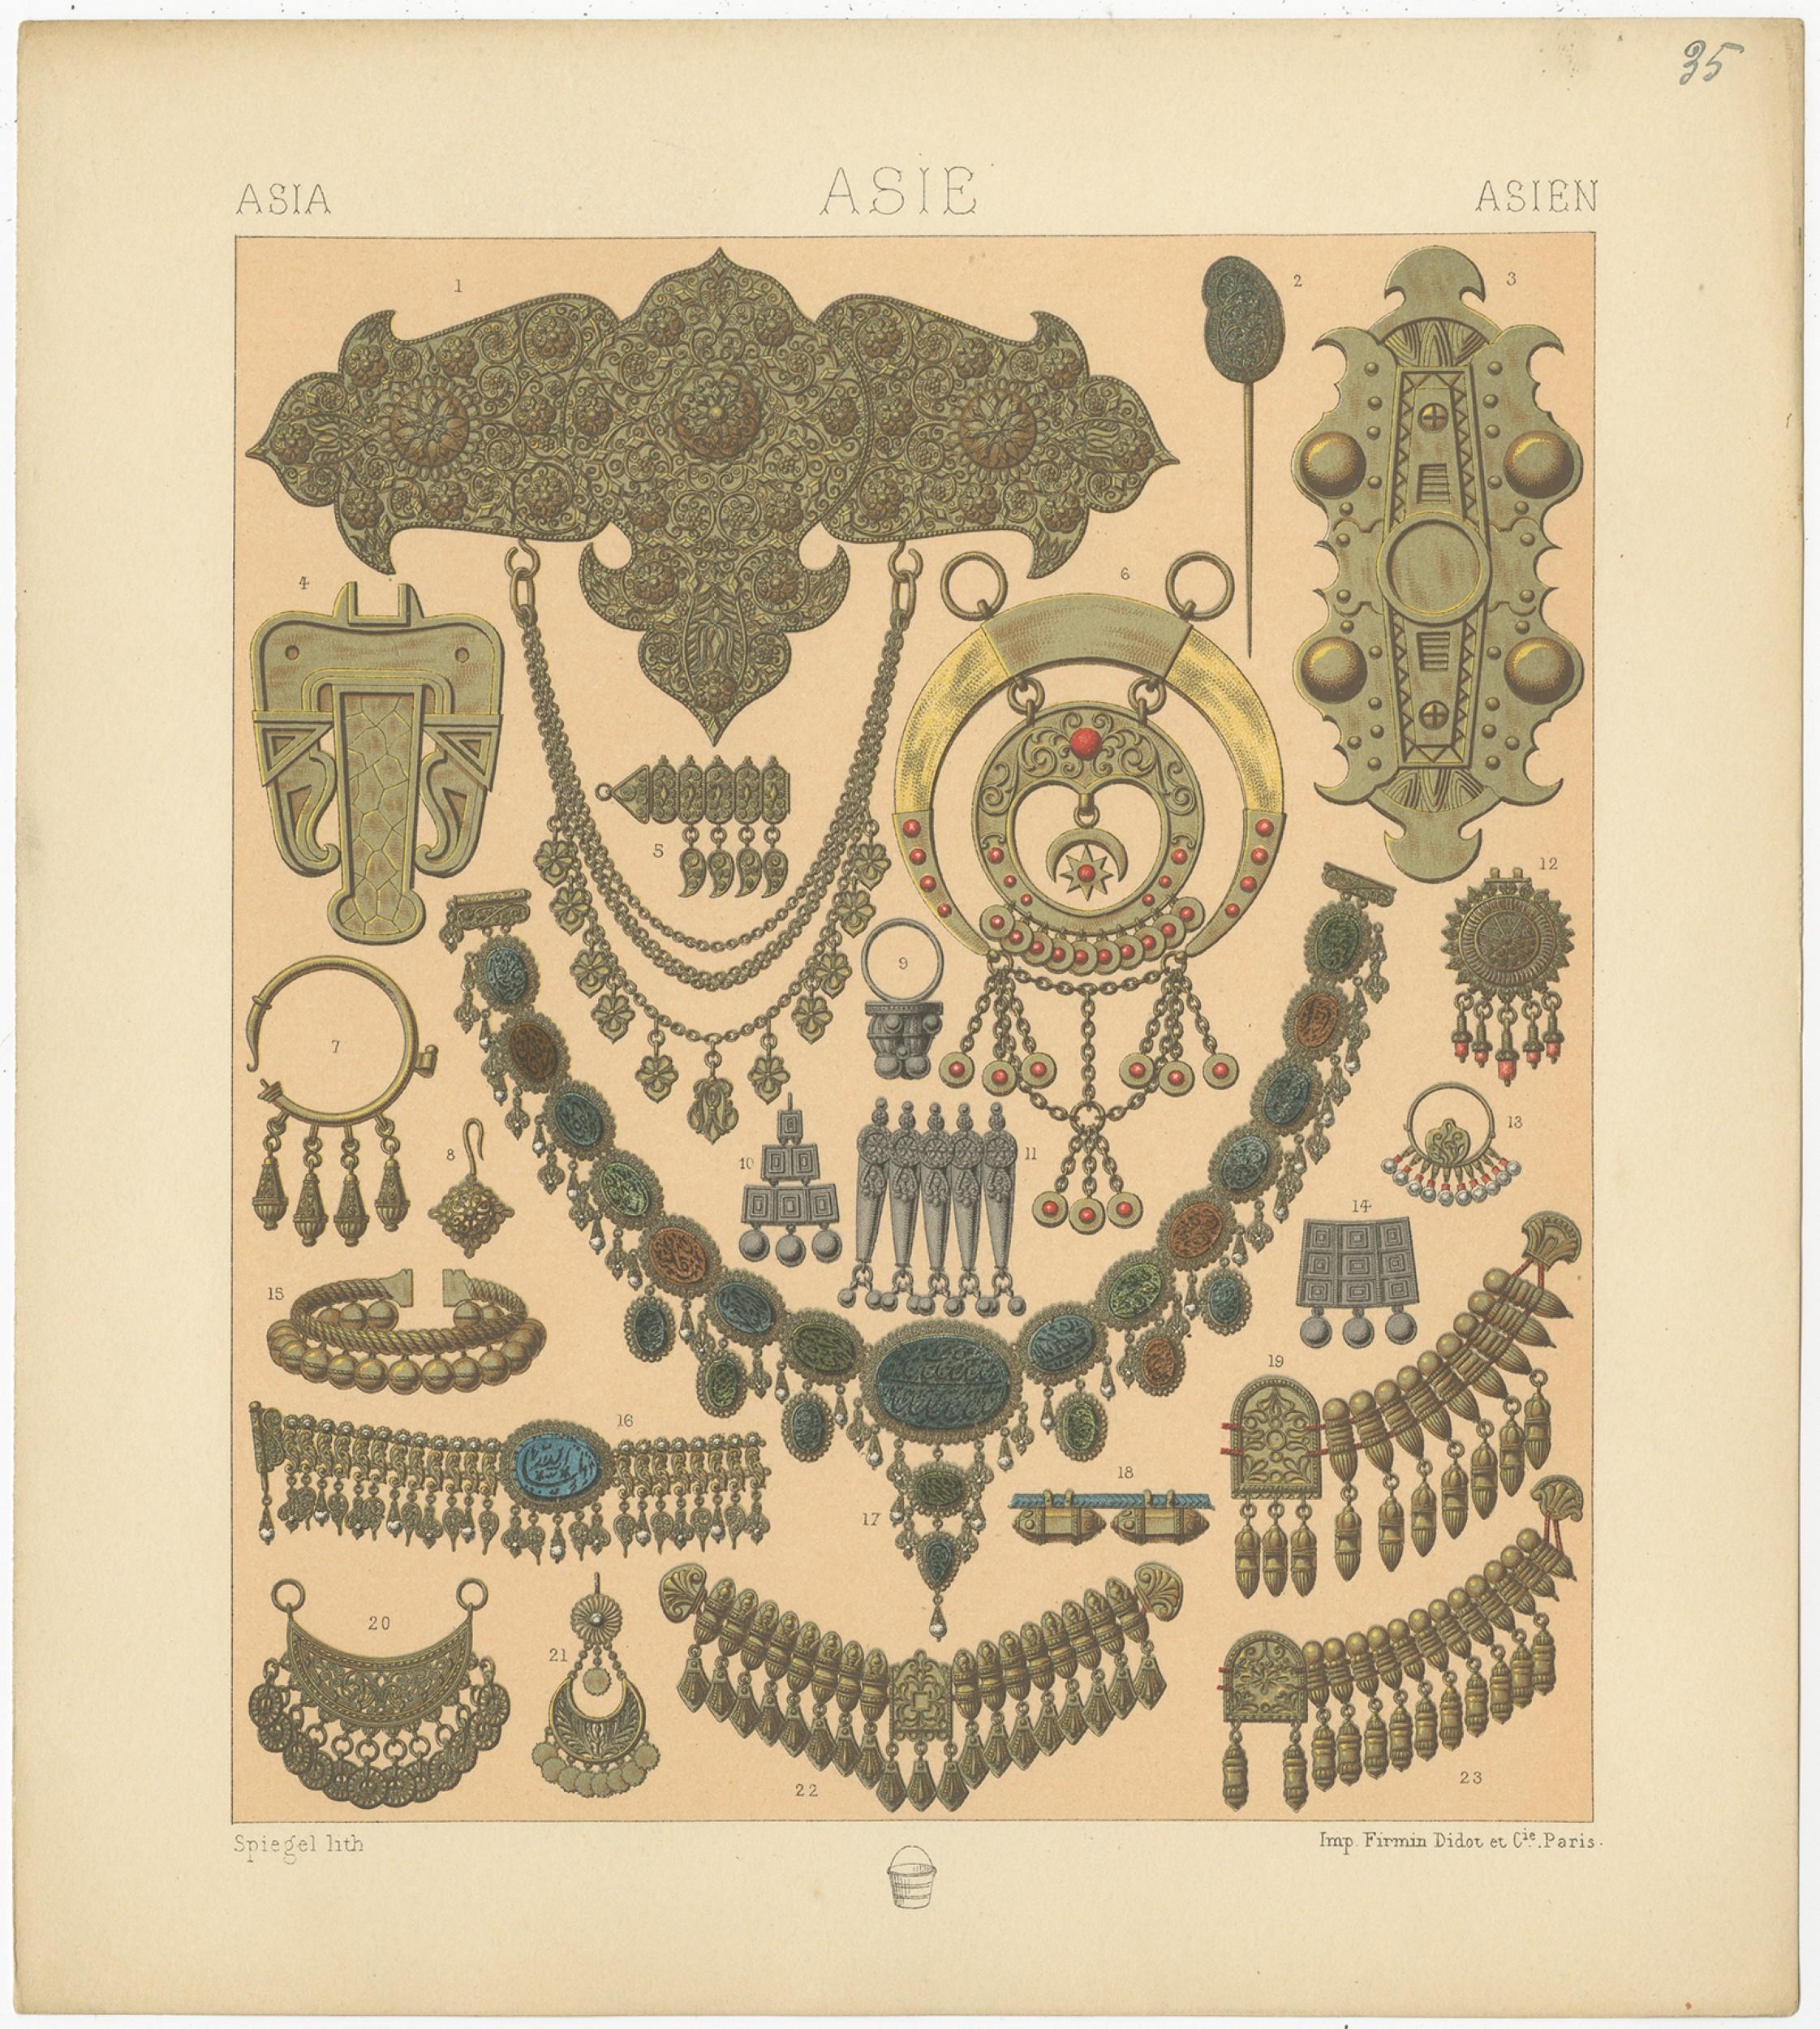 Antique print titled 'Asia - Asie - Asien'. Chromolithograph of Asian Jewelry. This print originates from 'Le Costume Historique' by M.A. Racinet. Published, circa 1880.